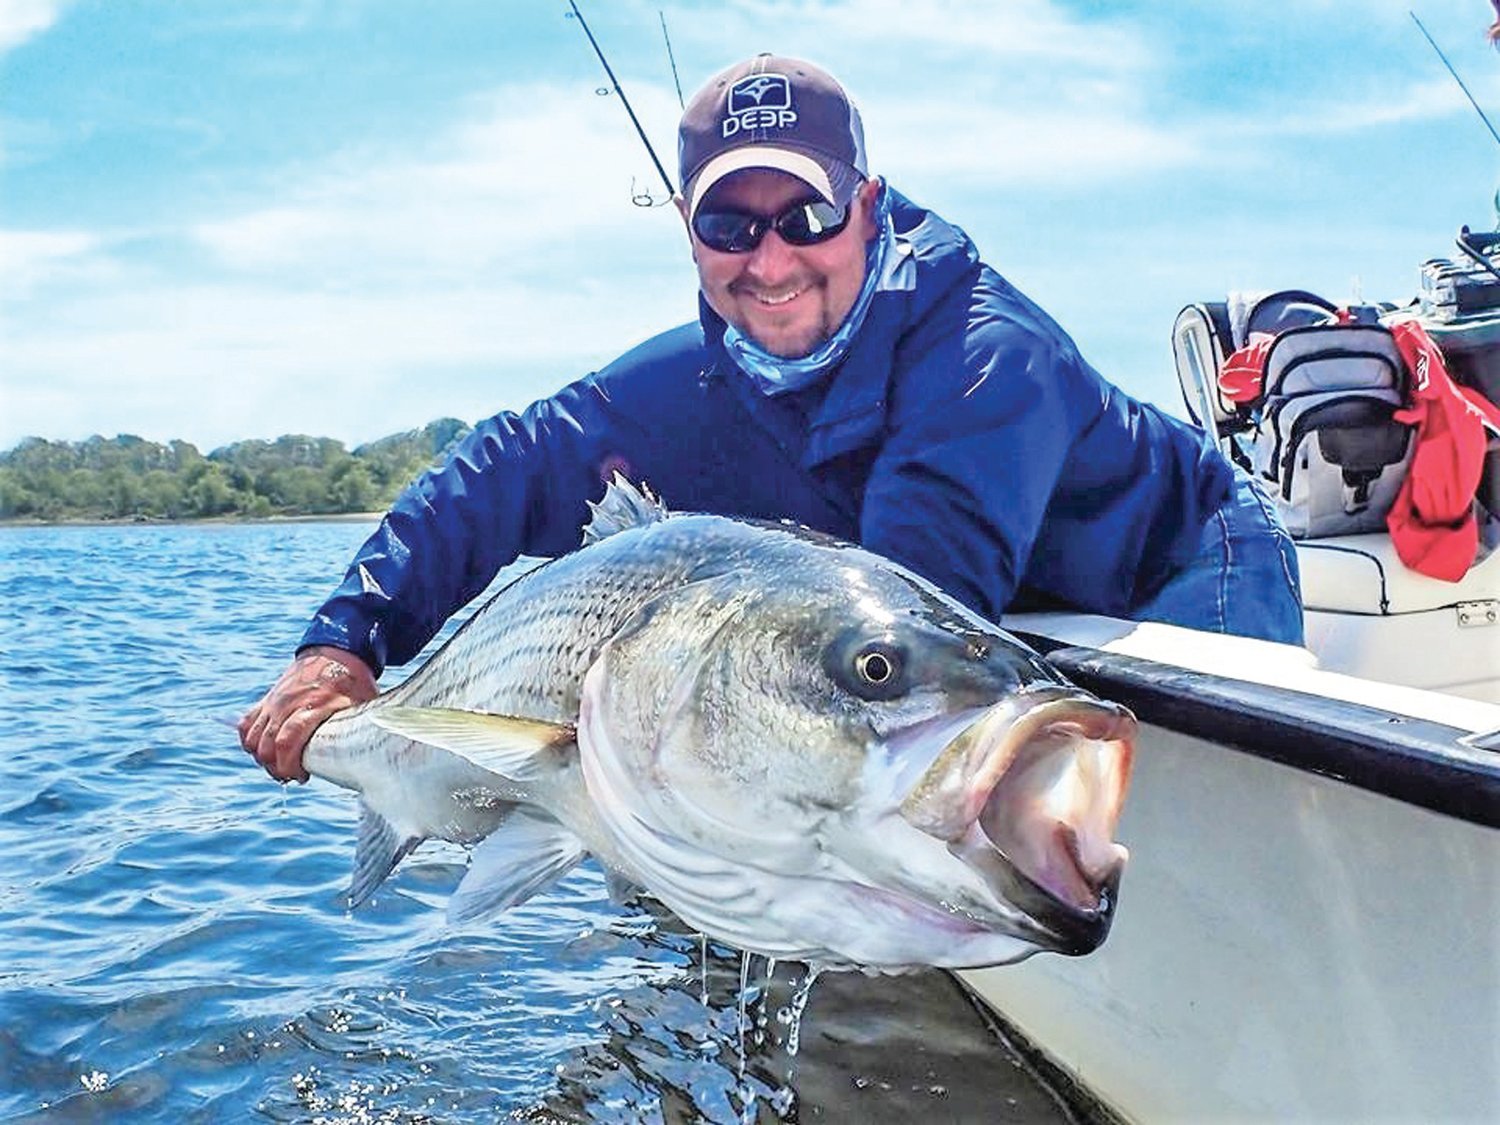 GUEST SPEAKER: Capt. Jack Sprengel of East Coast Charters, Warwick, will the quest speaker at the Saltwater Anglers seminar Monday, Jan. 30 at 7 p.m.